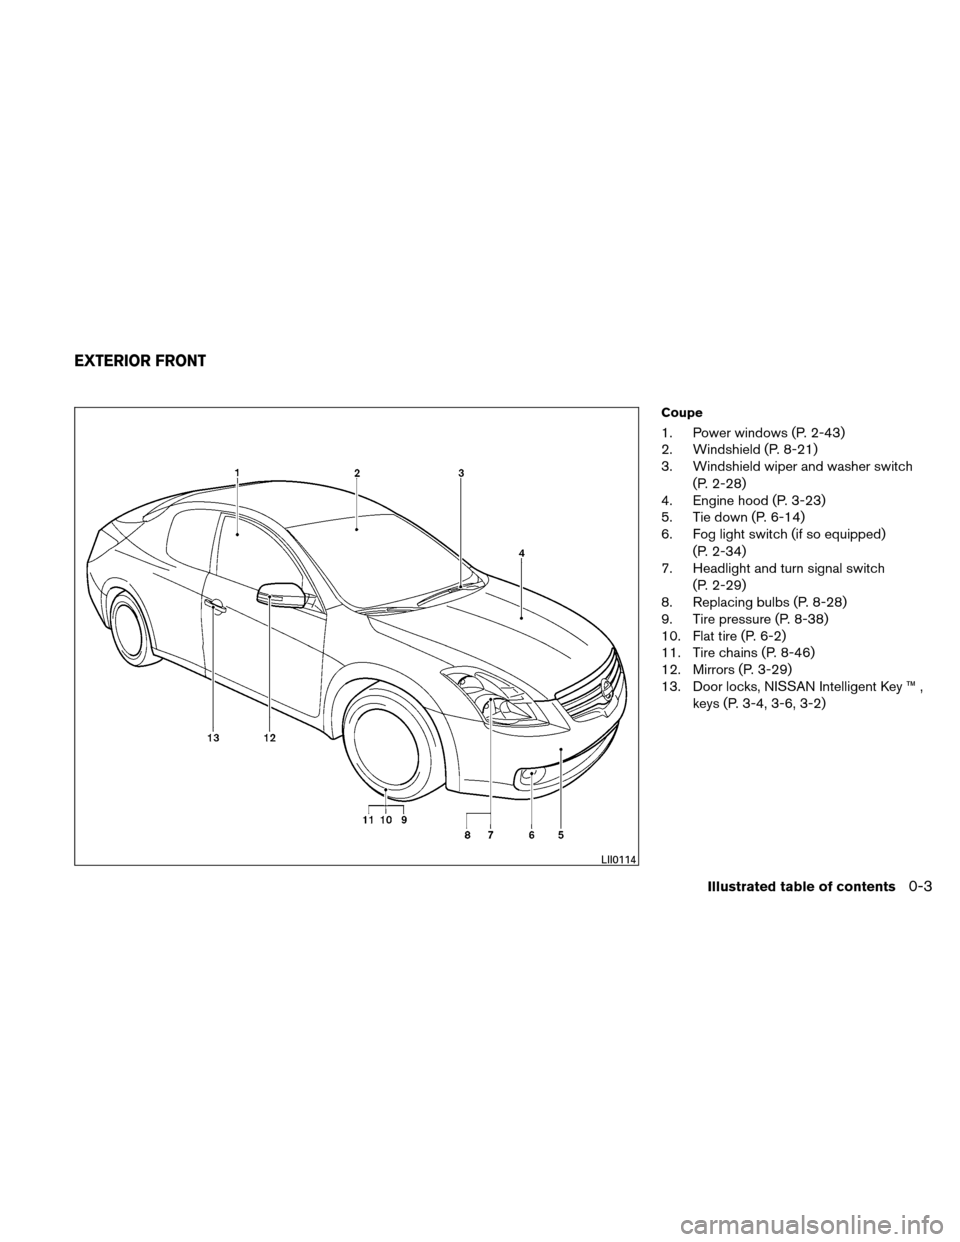 NISSAN ALTIMA COUPE 2011 D32 / 4.G Owners Manual Coupe
1. Power windows (P. 2-43)
2. Windshield (P. 8-21)
3. Windshield wiper and washer switch(P. 2-28)
4. Engine hood (P. 3-23)
5. Tie down (P. 6-14)
6. Fog light switch (if so equipped)
(P. 2-34)
7.